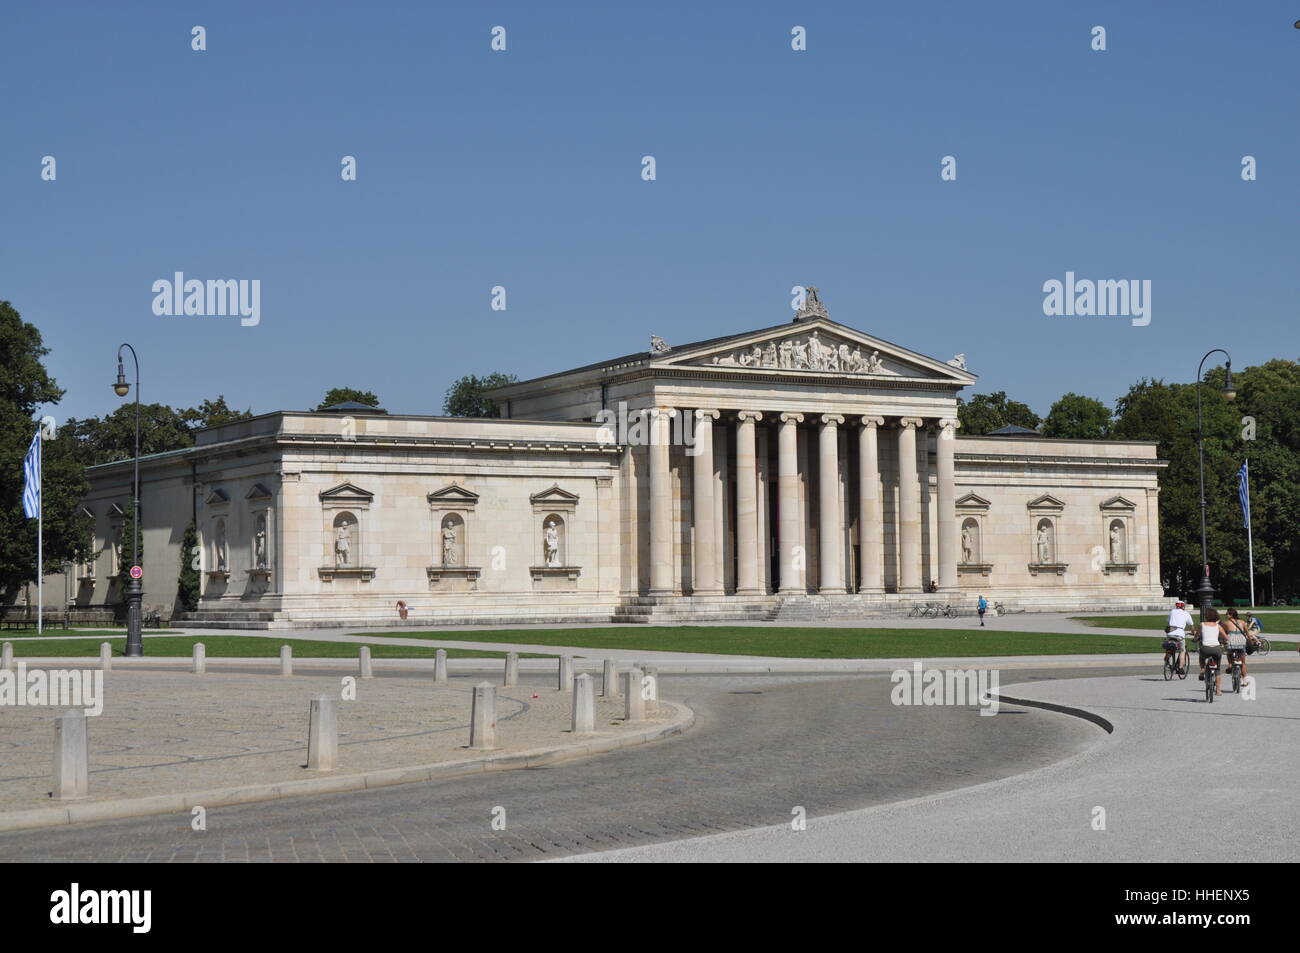 bavaria, museum, germany, german federal republic, munich, style of Stock Photo